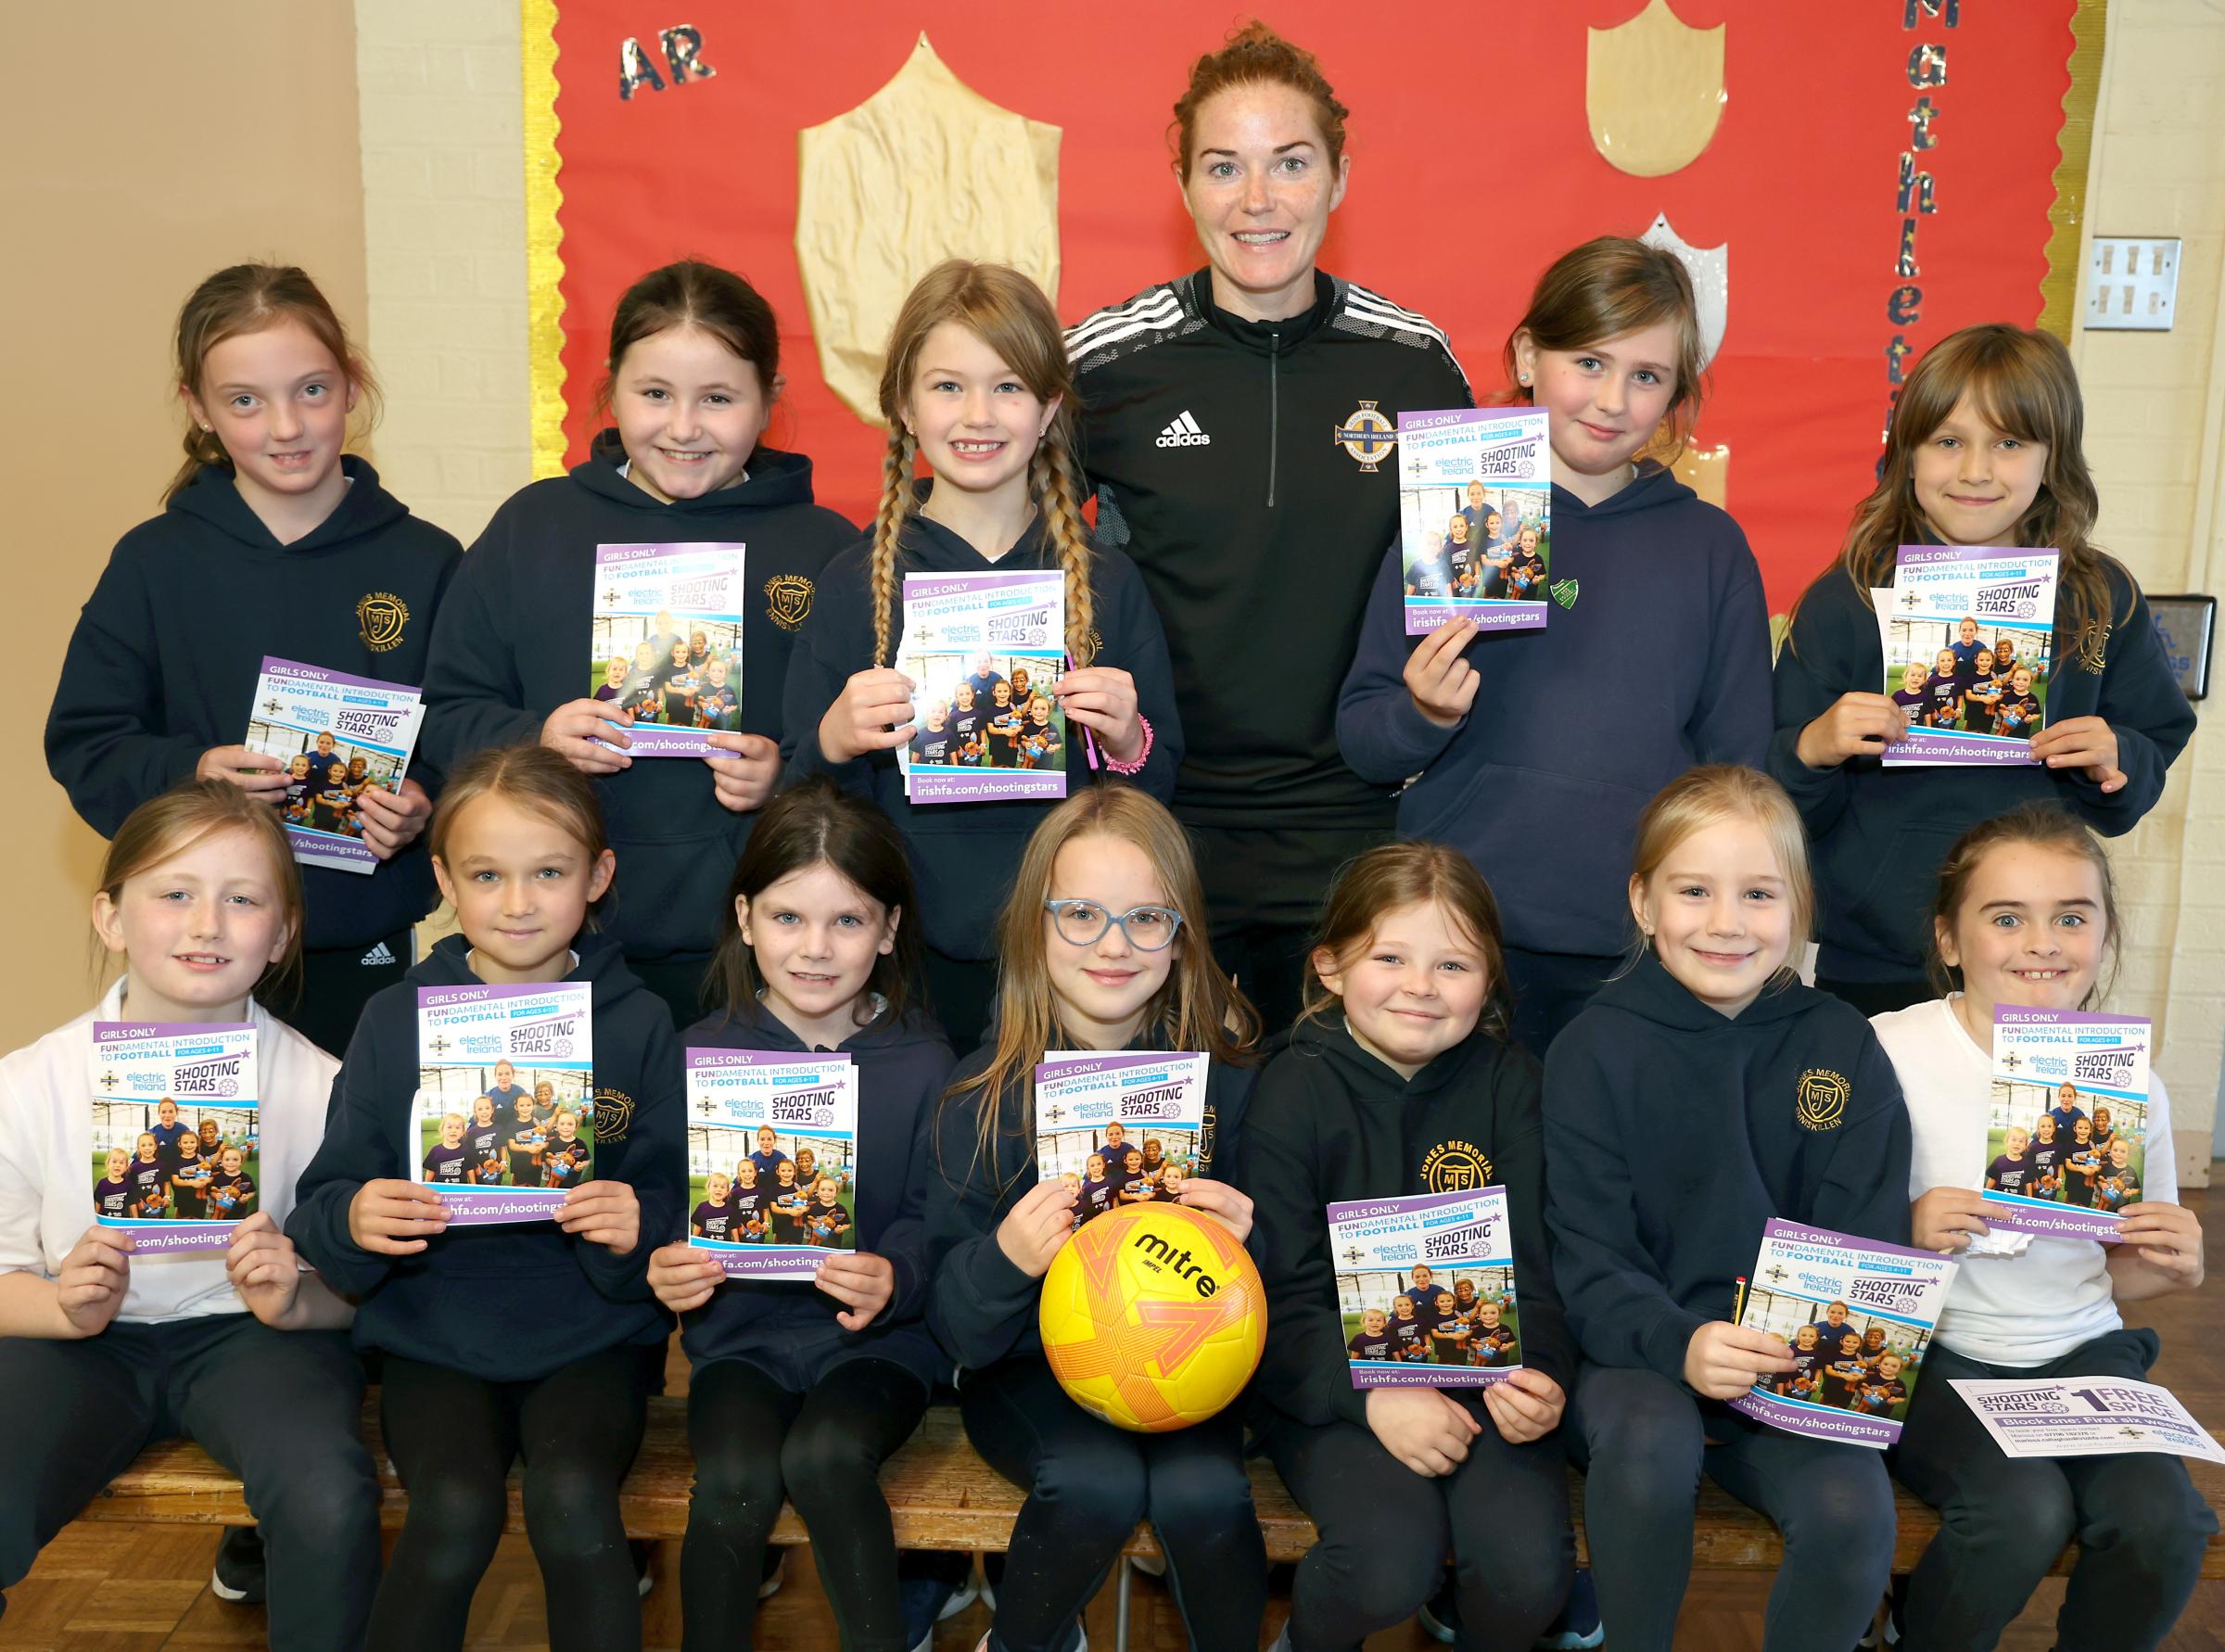 Marissa Callaghan, Northern Ireland Captain and IFA Diversification Officer, with P5 pupils at Jones Memorial Primary School.